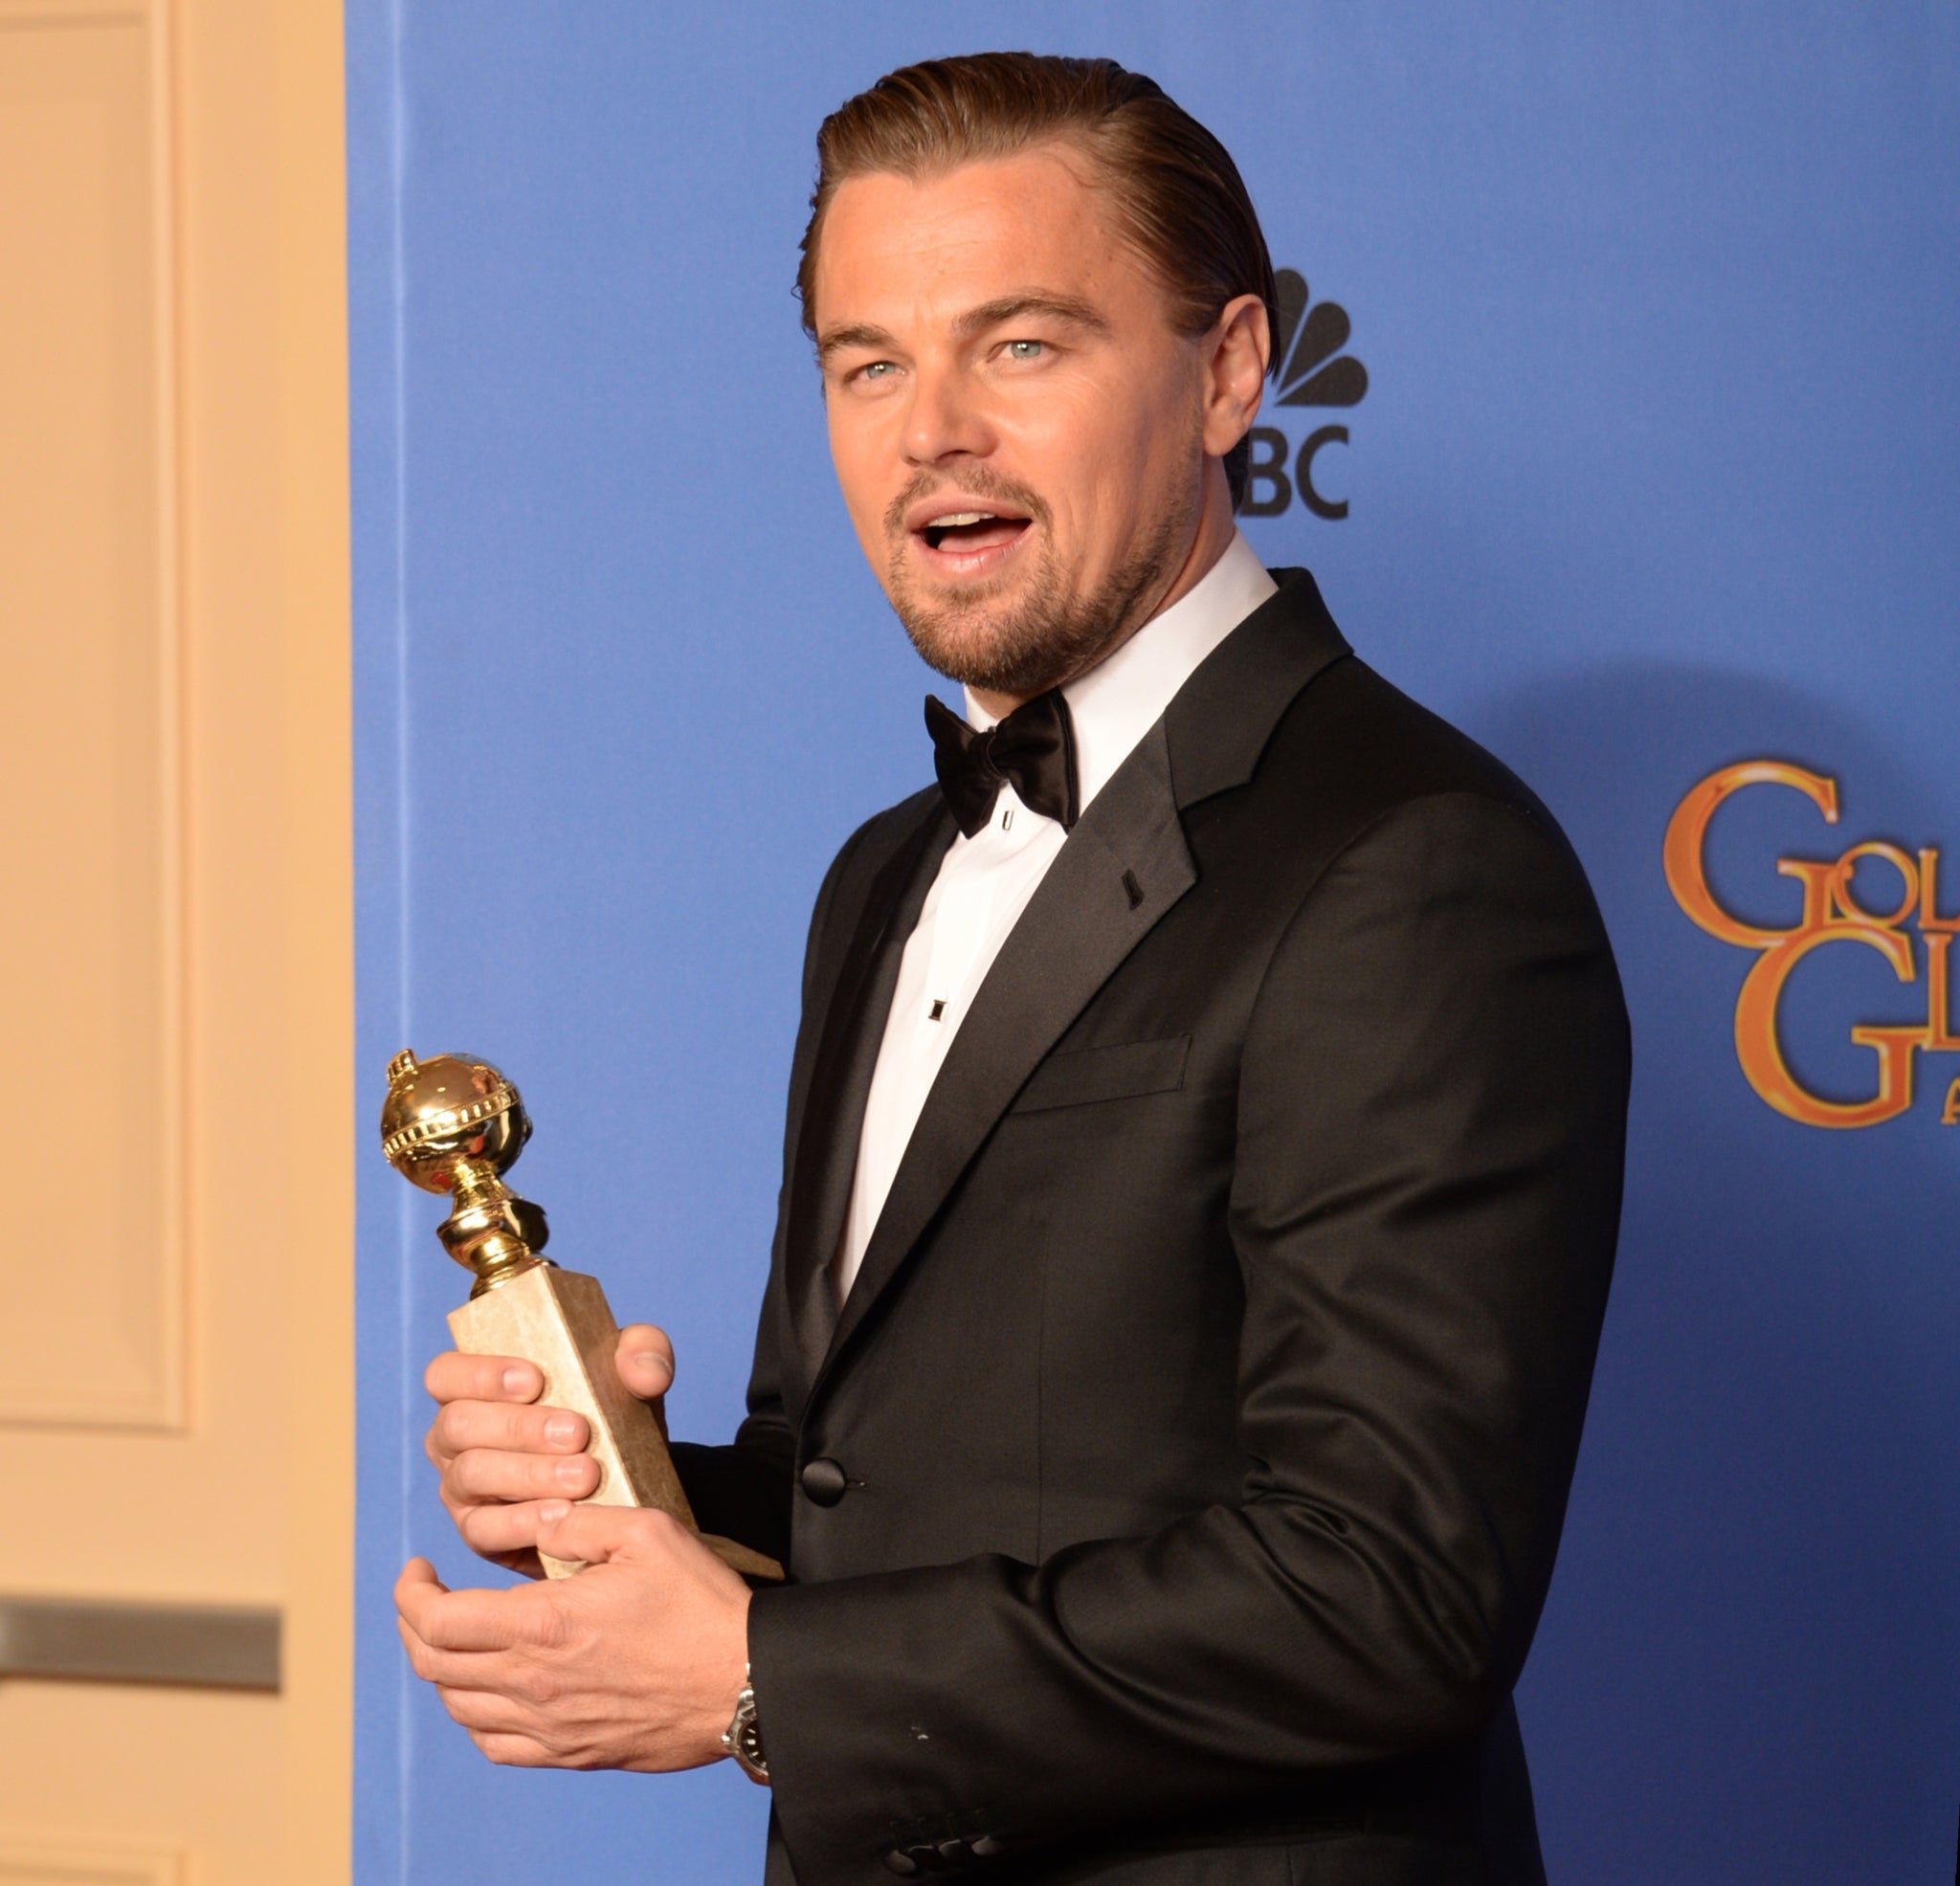 Leonardo DiCaprio with his Golden Globe for best actor in a comedy or musical